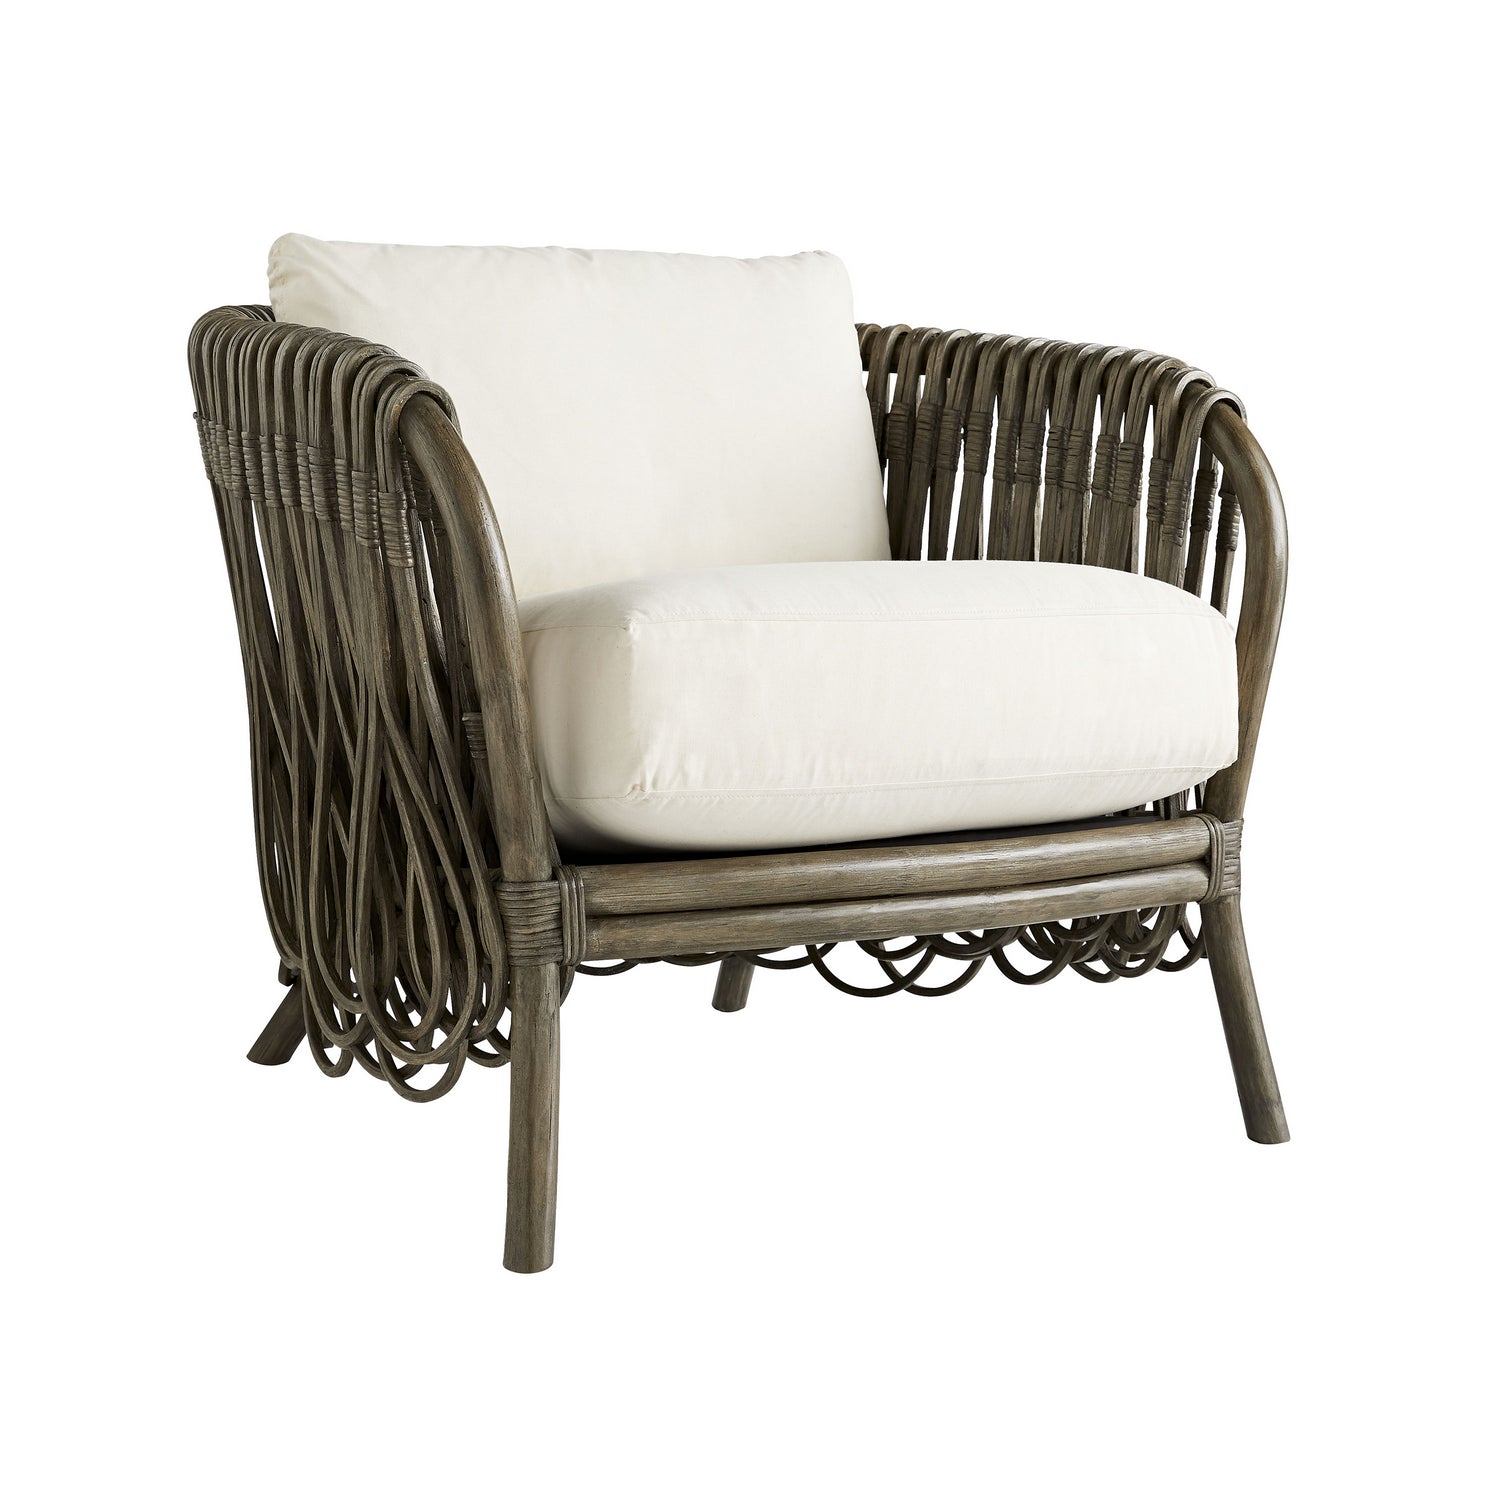 Chair from the Lightwash collection in Gray Wash finish